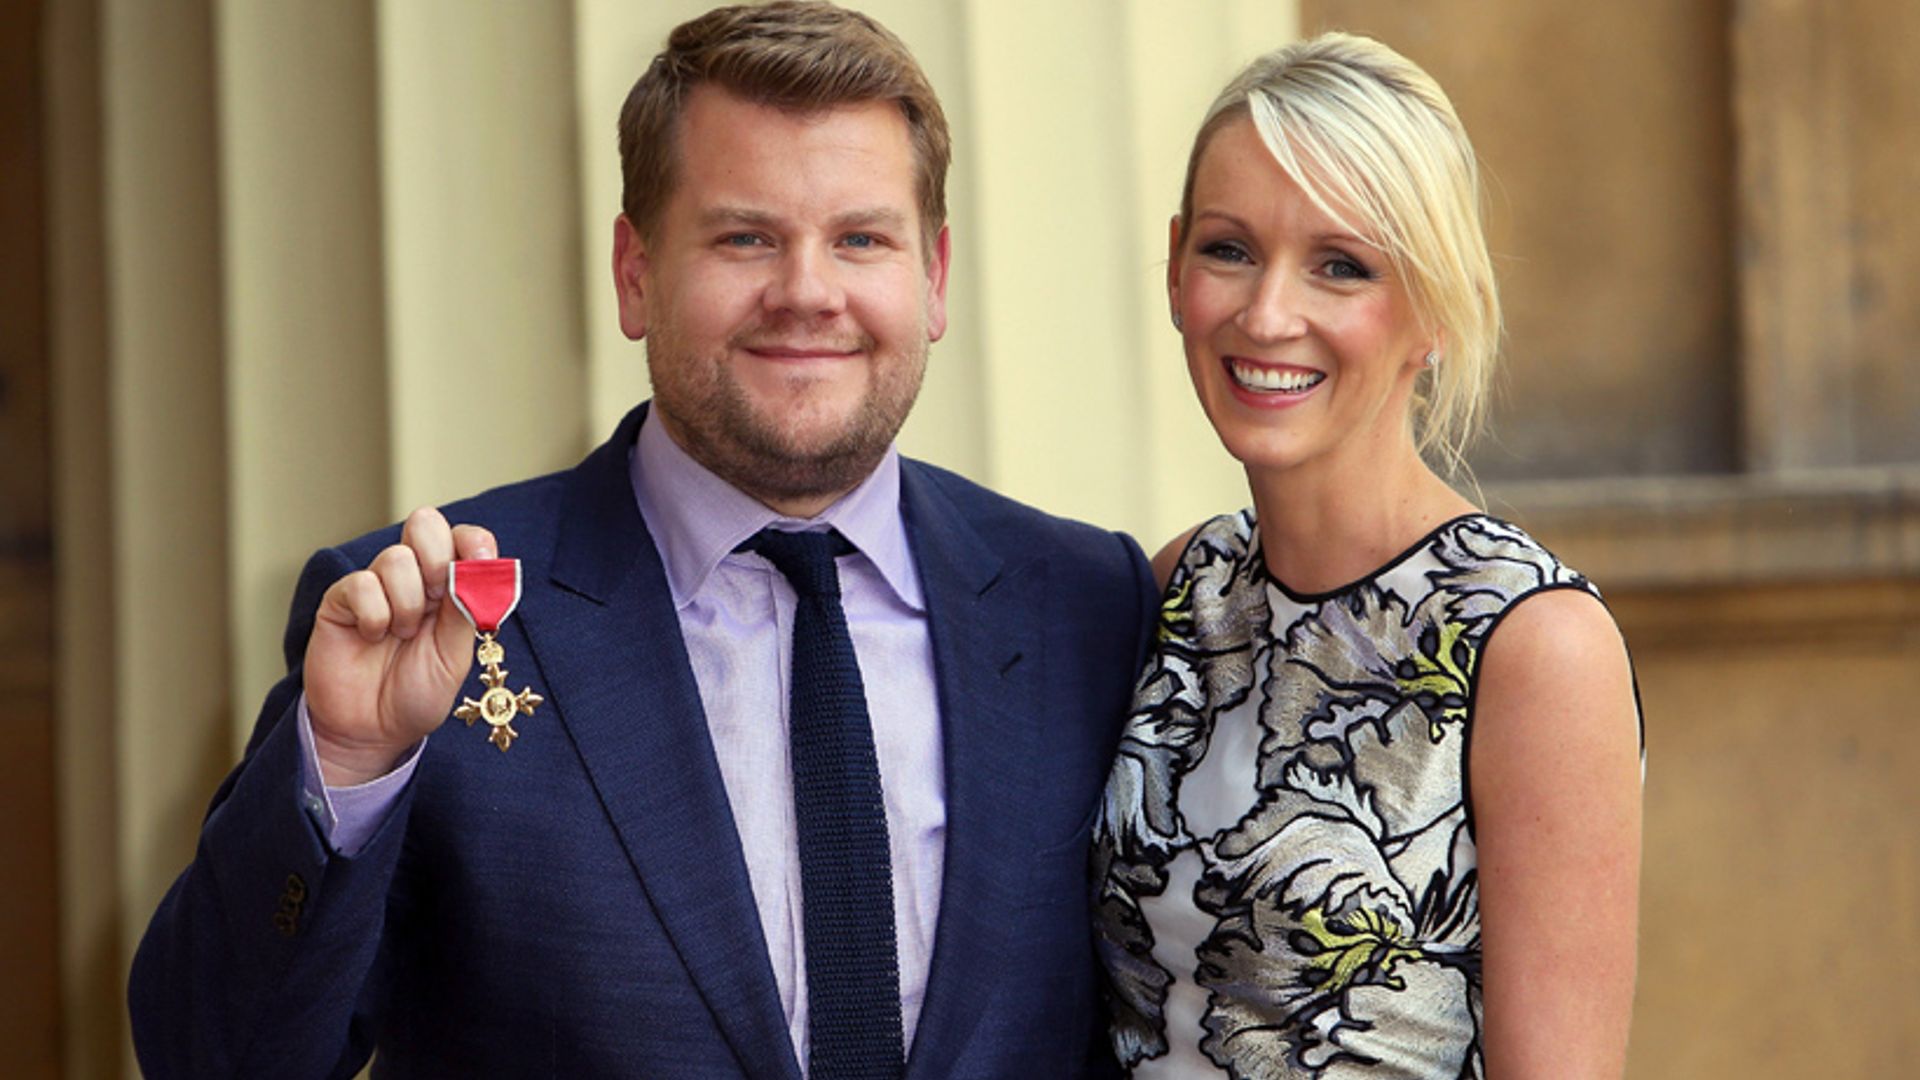 James Corden to attend Prince Harry and Meghan Markle's royal wedding